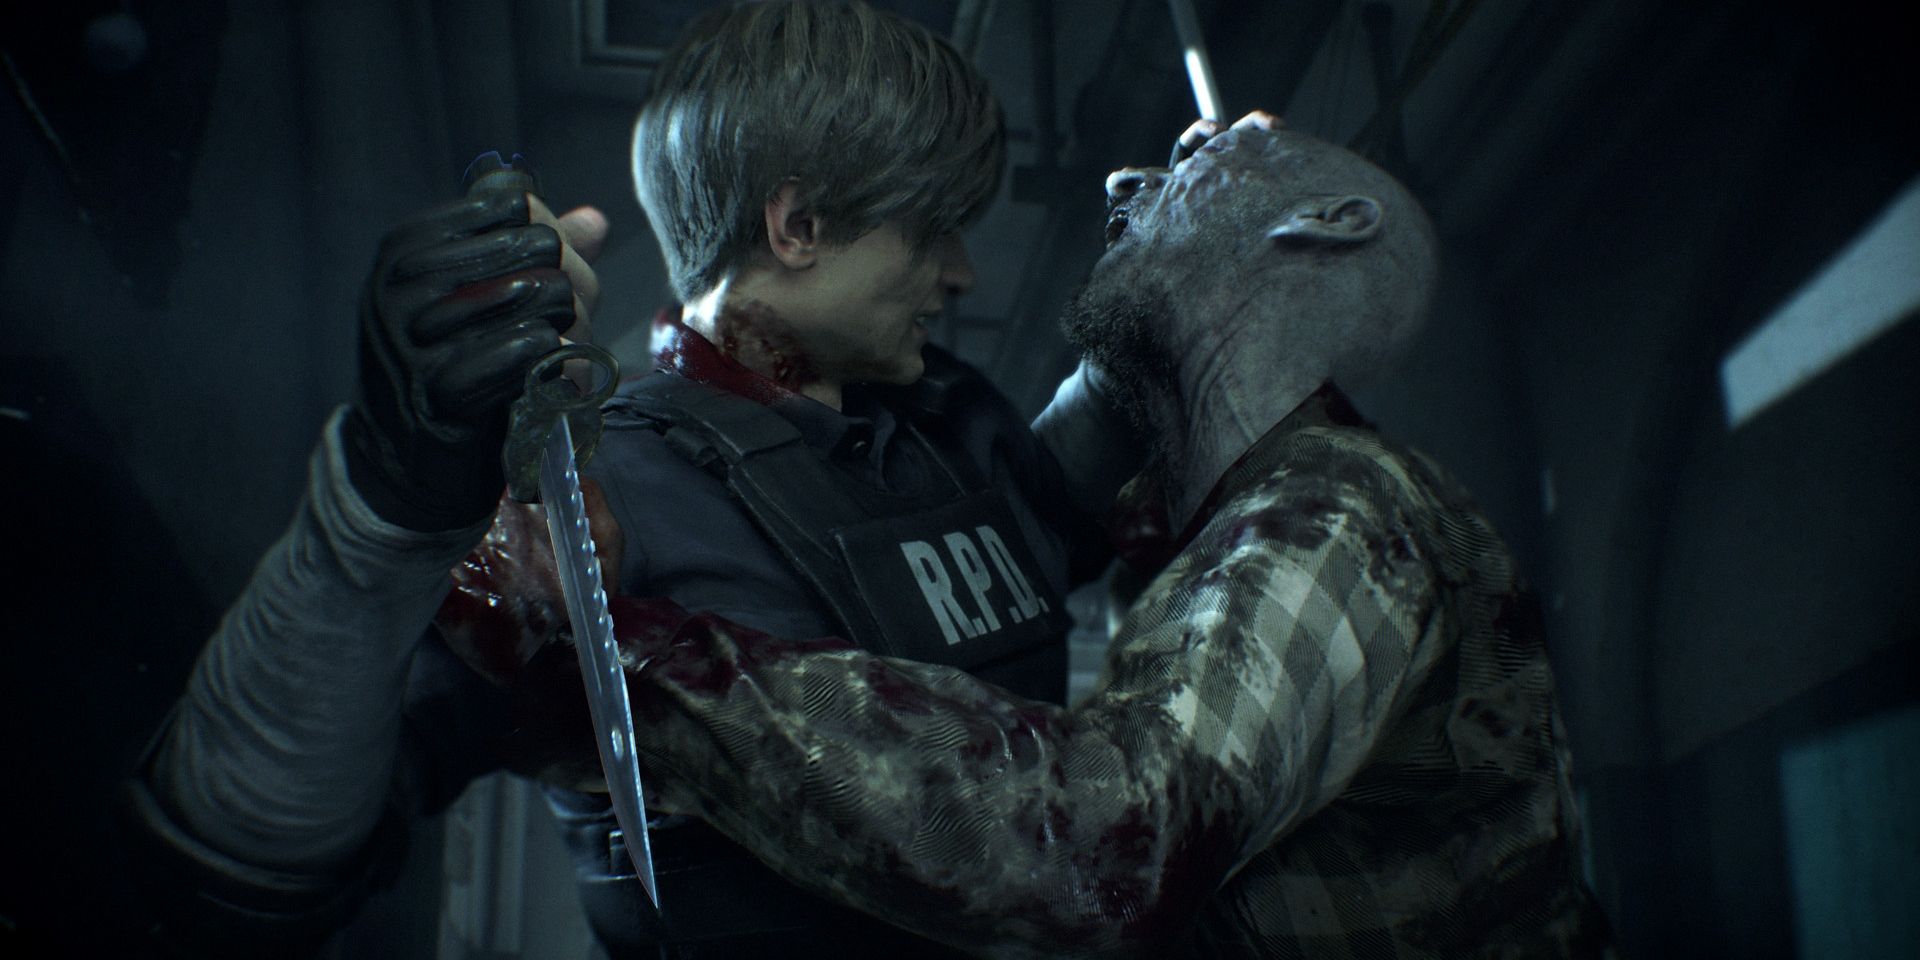 Leon fighting off a zombie with a dagger in Resident Evil 2 Remake